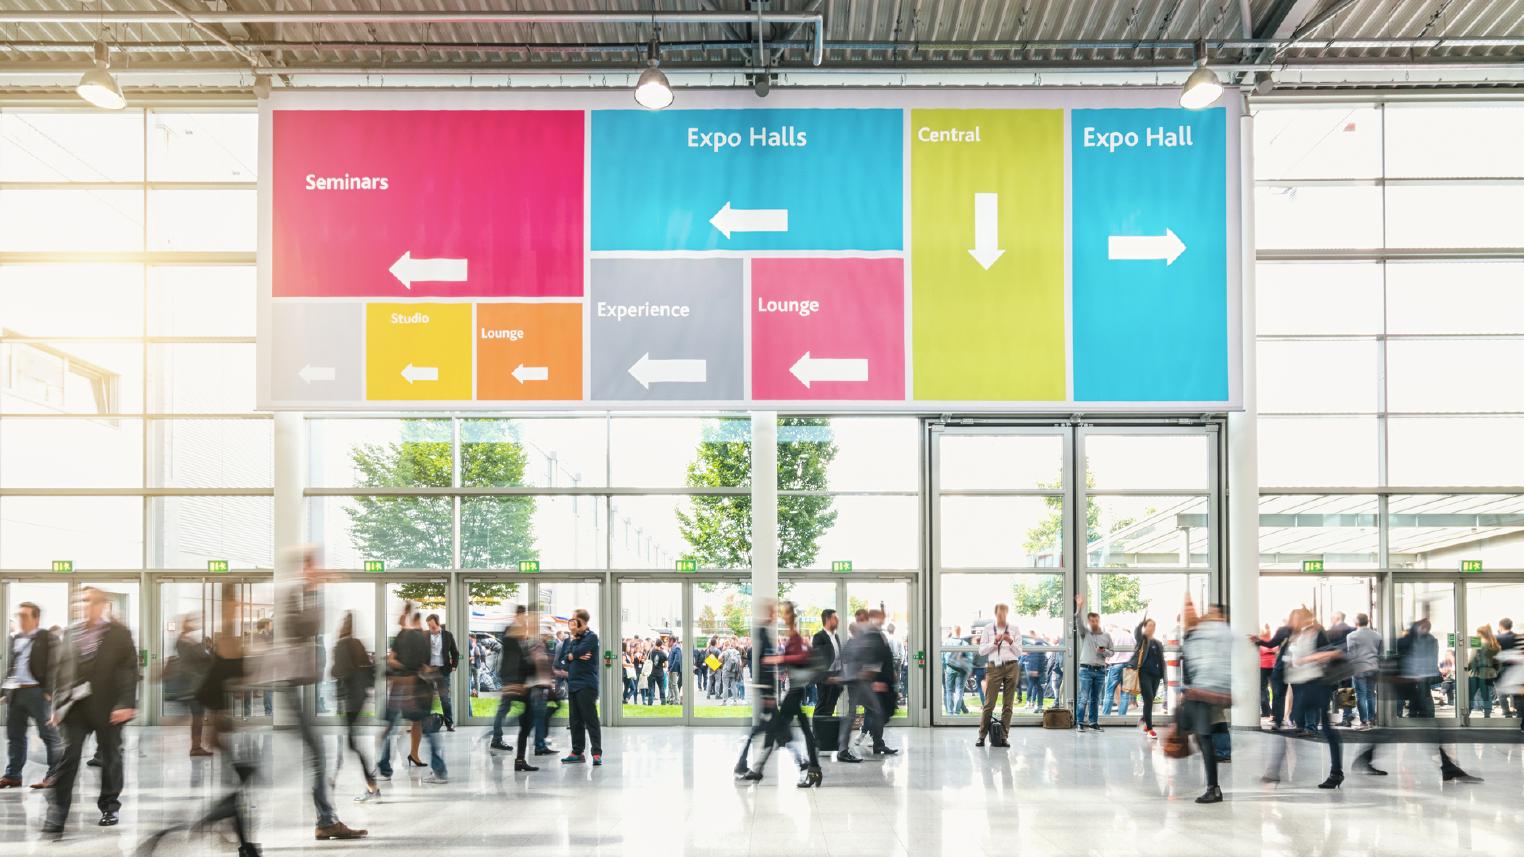 Exhibition organisers could capture 20% more value with better wayfinding